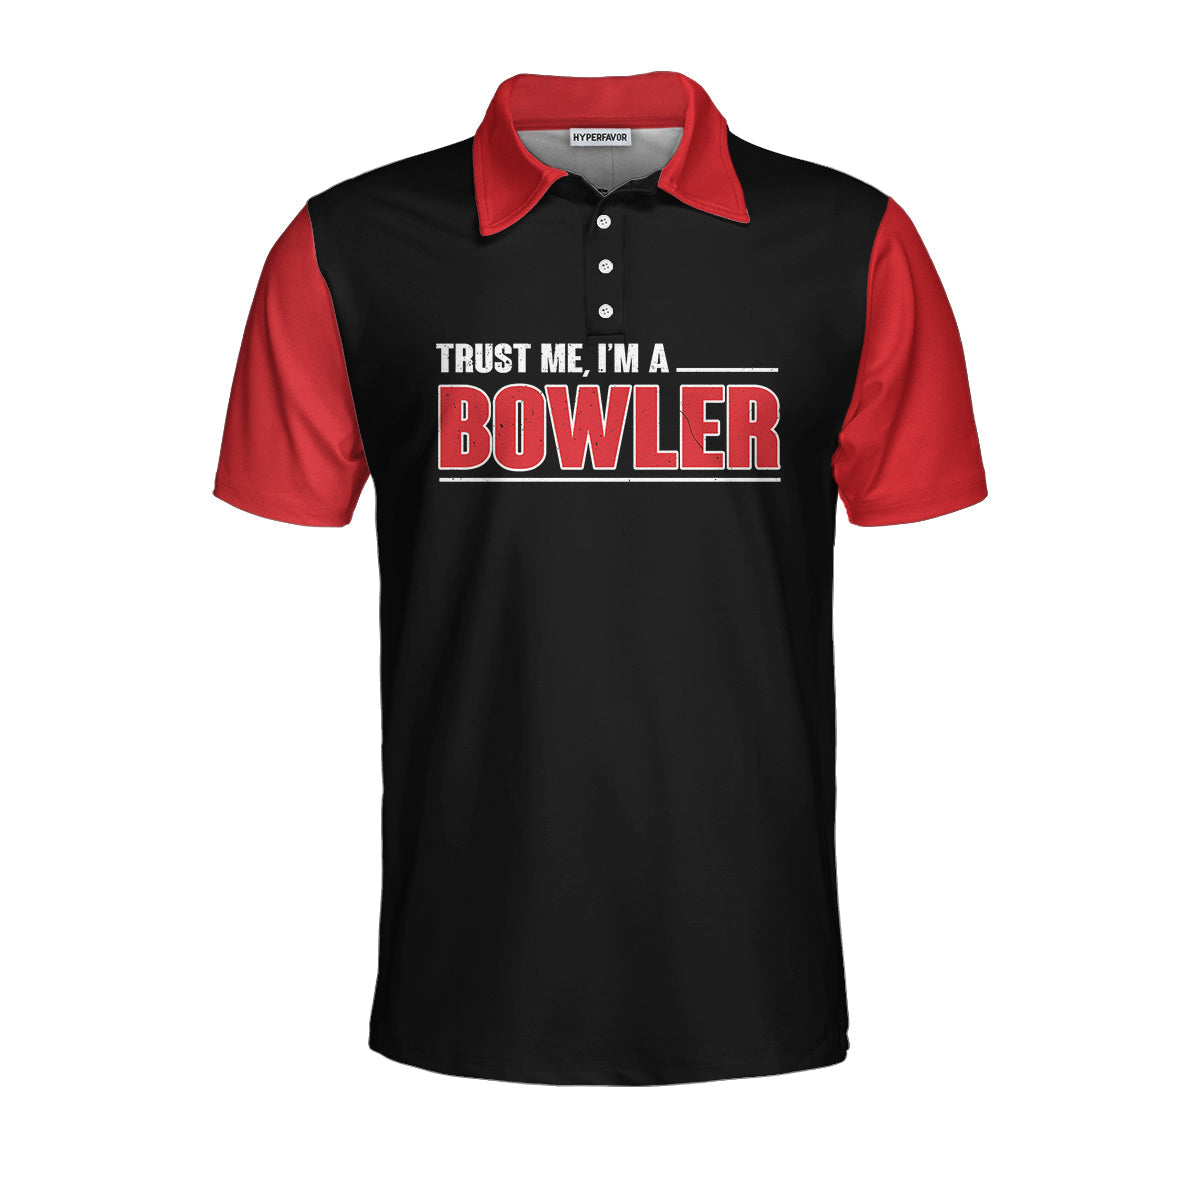 Sleep With Bowler Polo Shirt/ Black And Red Bowling Short Sleeve Polo Shirt/ Funny Shirt With Sayings Coolspod